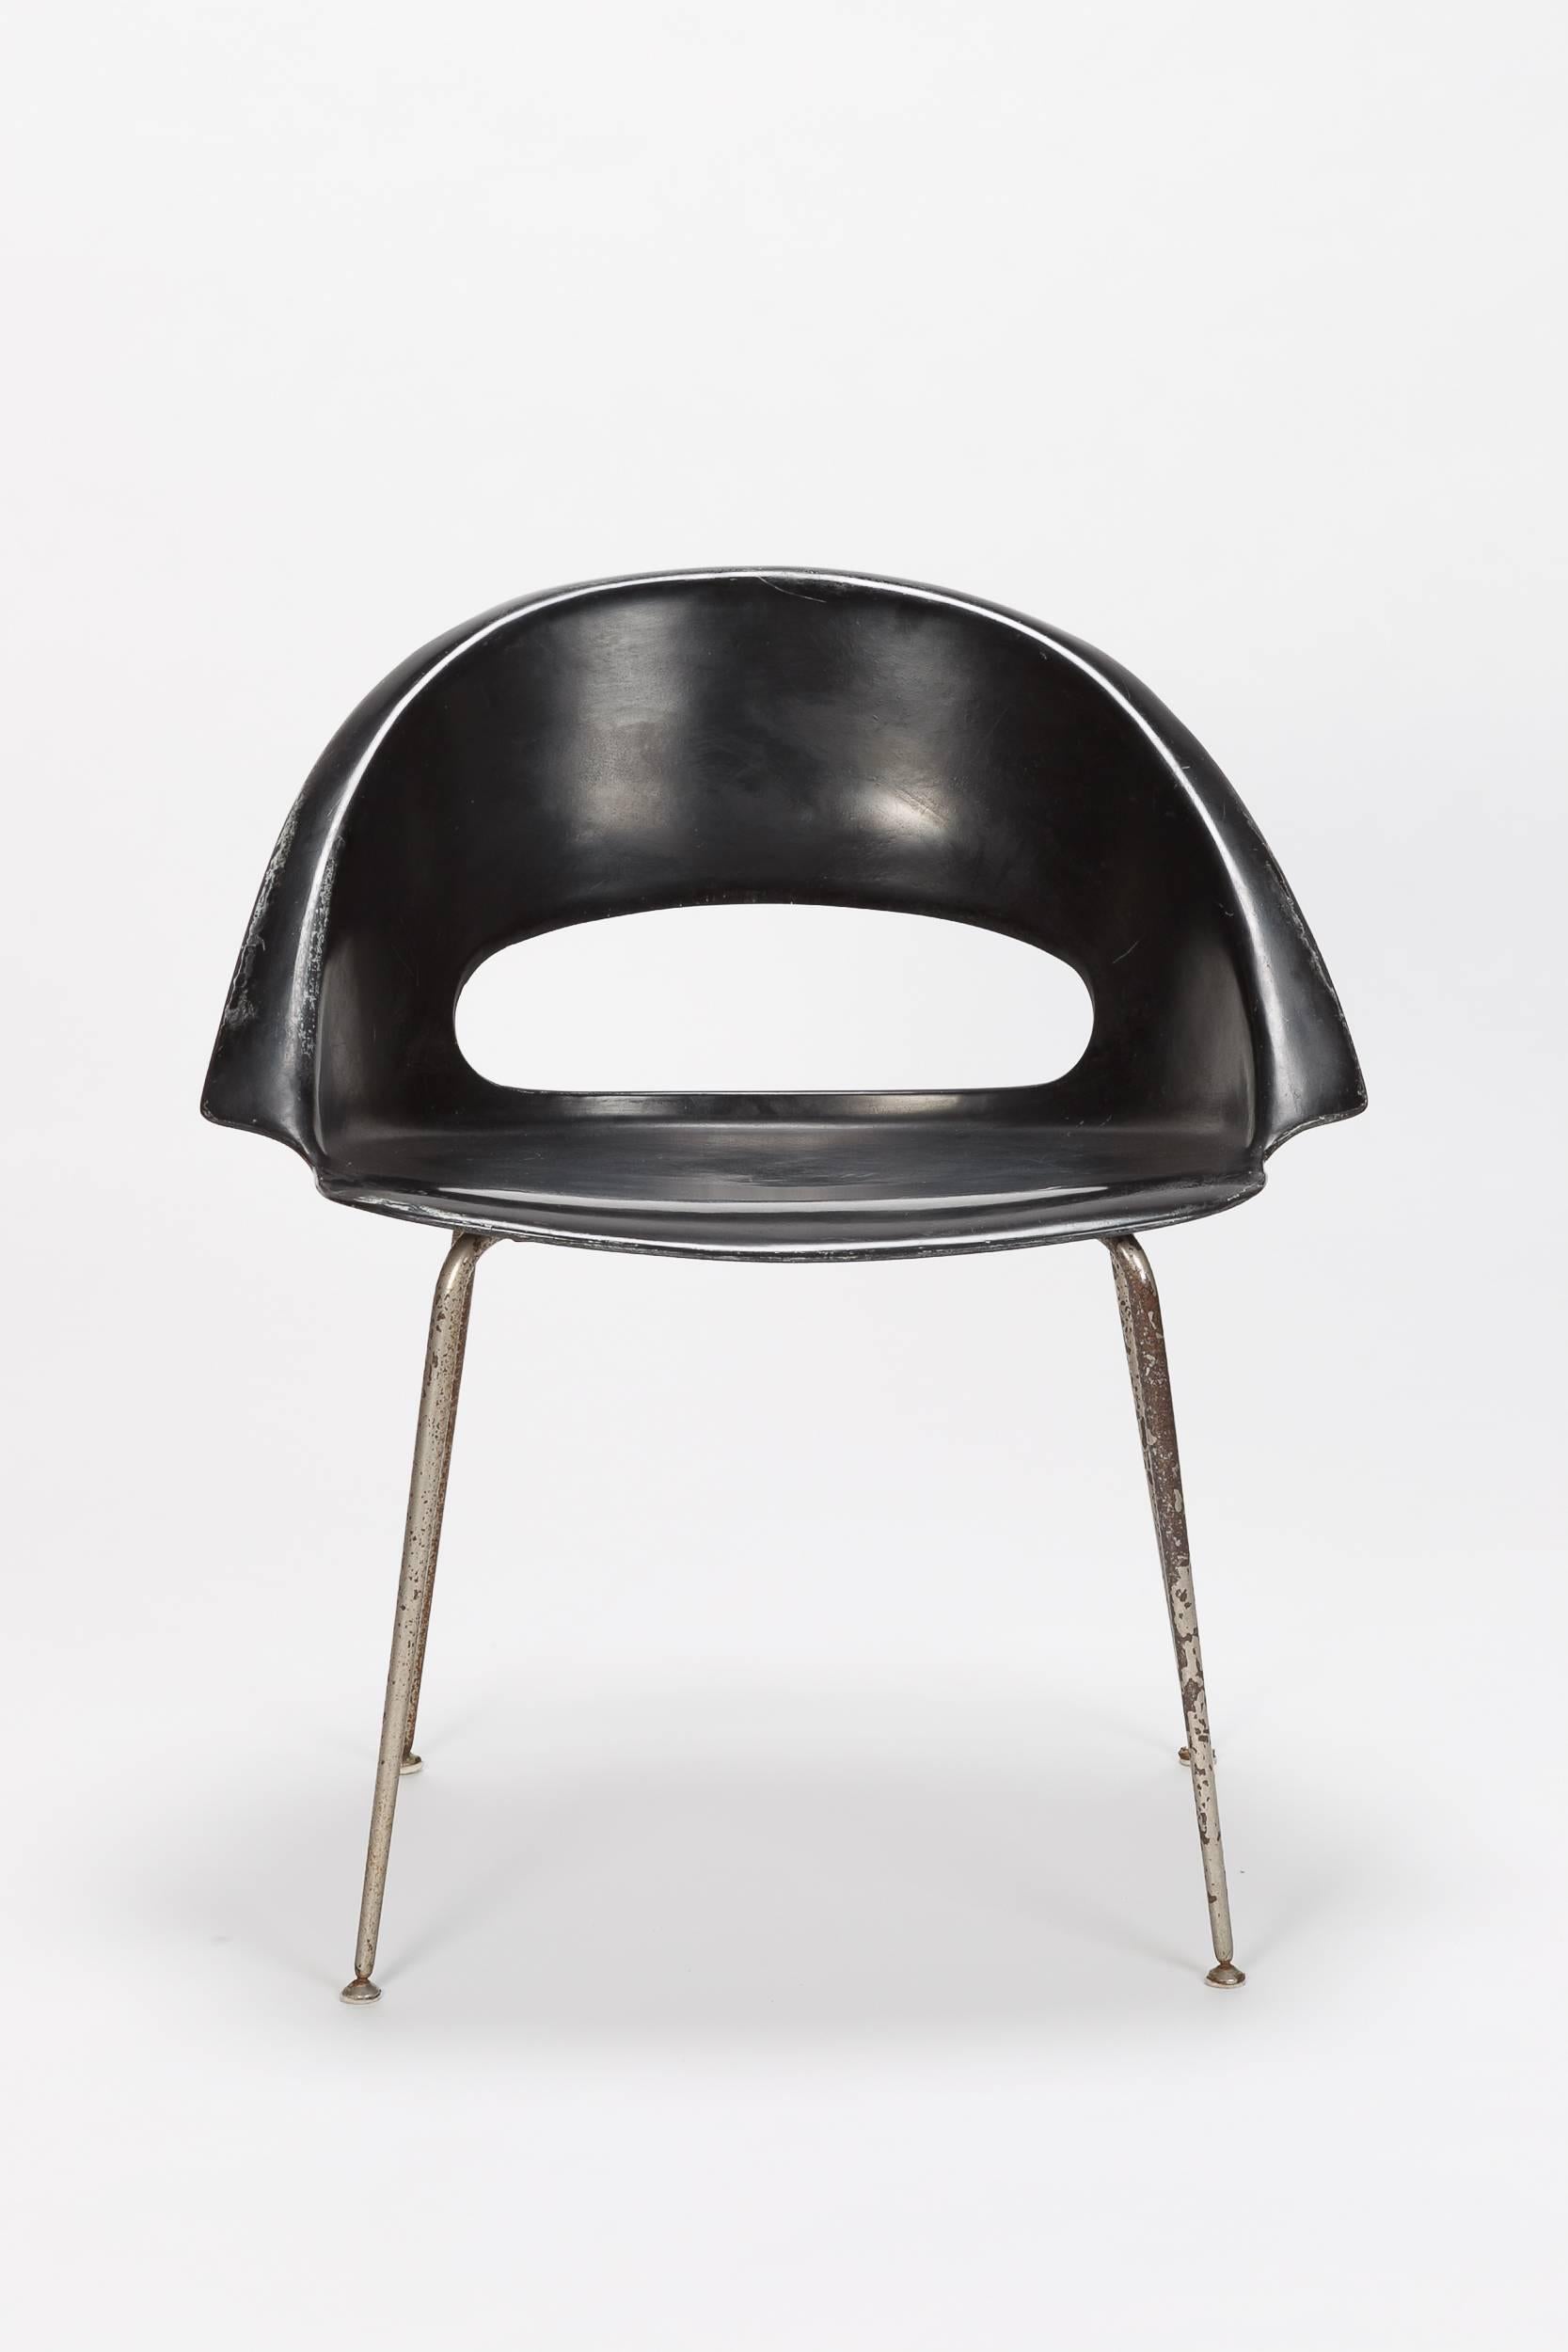 Very seldom Kay Lyngfeldt Larsen & Steen Ejiler Rasmussen chair model BO 33 designed 1955 in a rare collaboration between the designers. The chair has been manufactured by Bovirke in Denmark and remains the only plastic object. The design icon